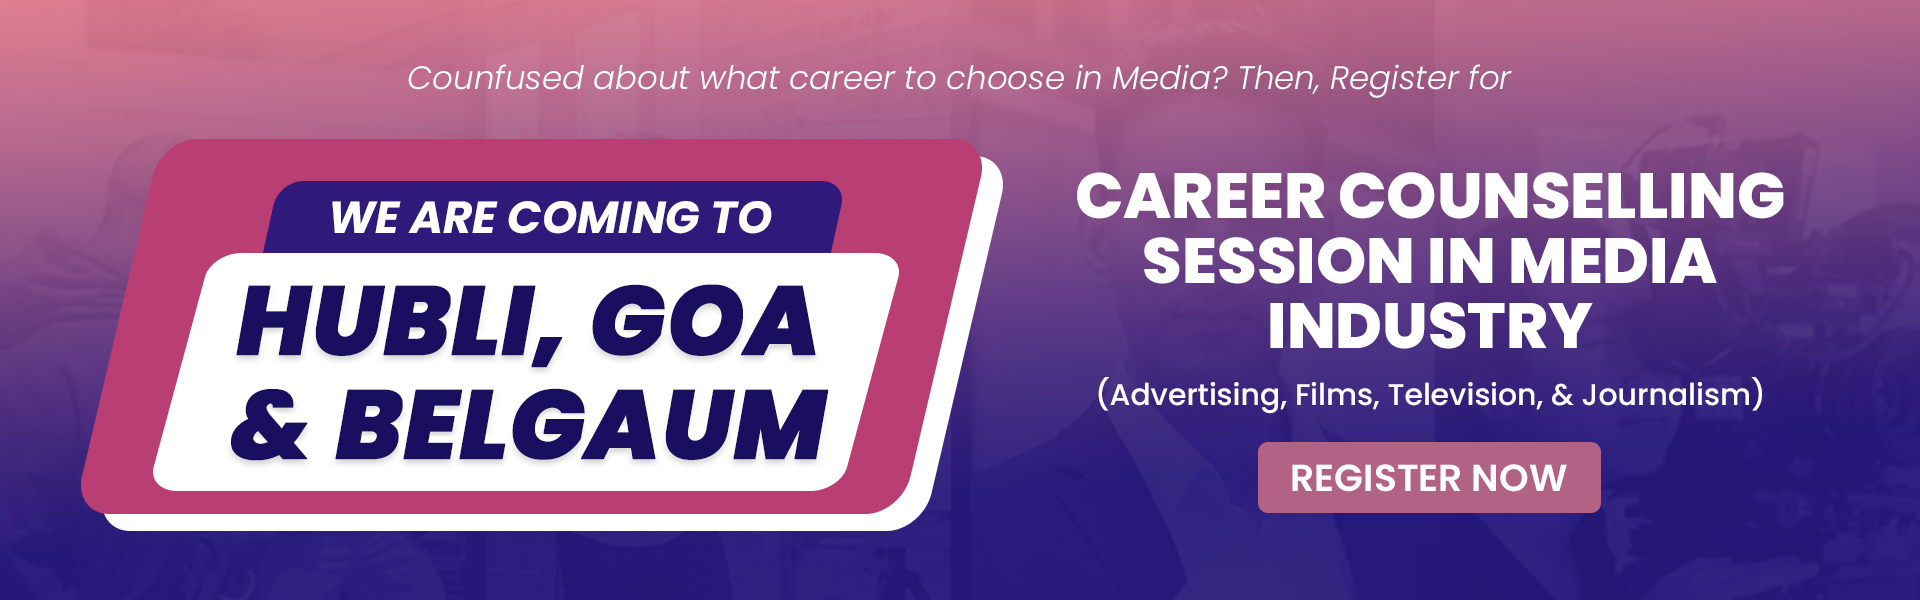 Career Counselling Session in Media Industry